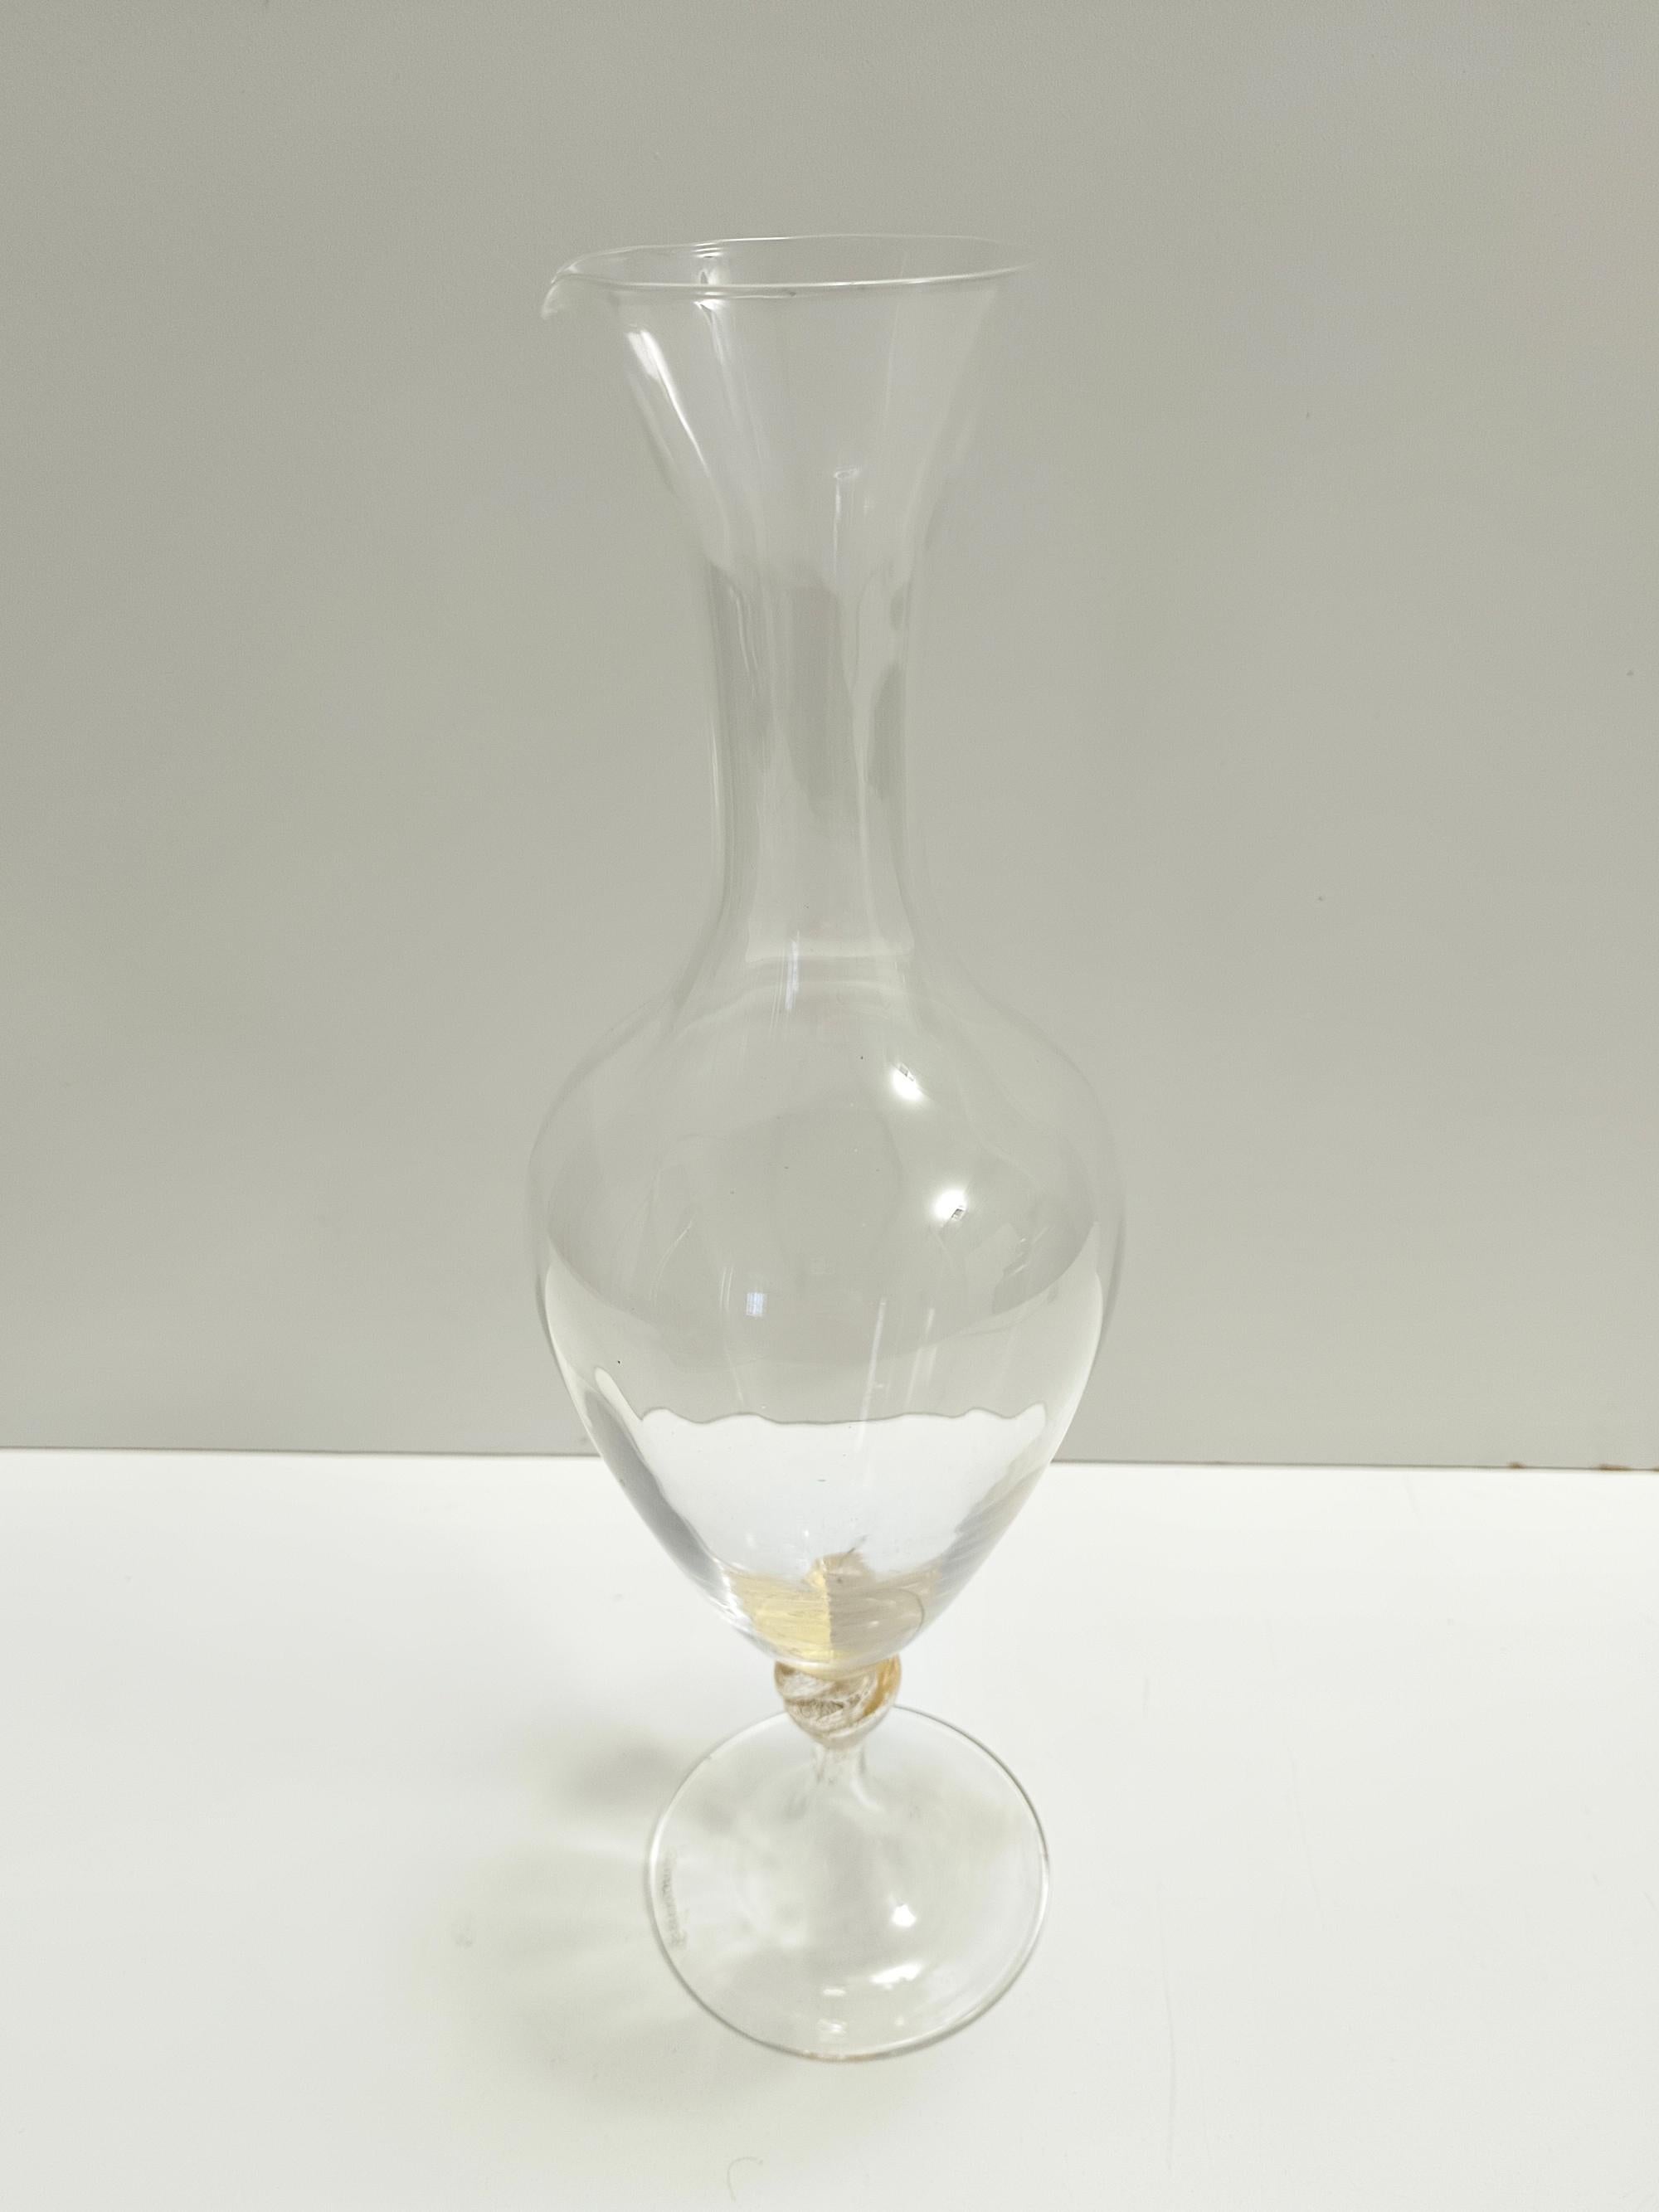 Late 20th Century Transparent and Murano Glass Pitcher Vase by La Murrina with Gold Leaf, Italy For Sale